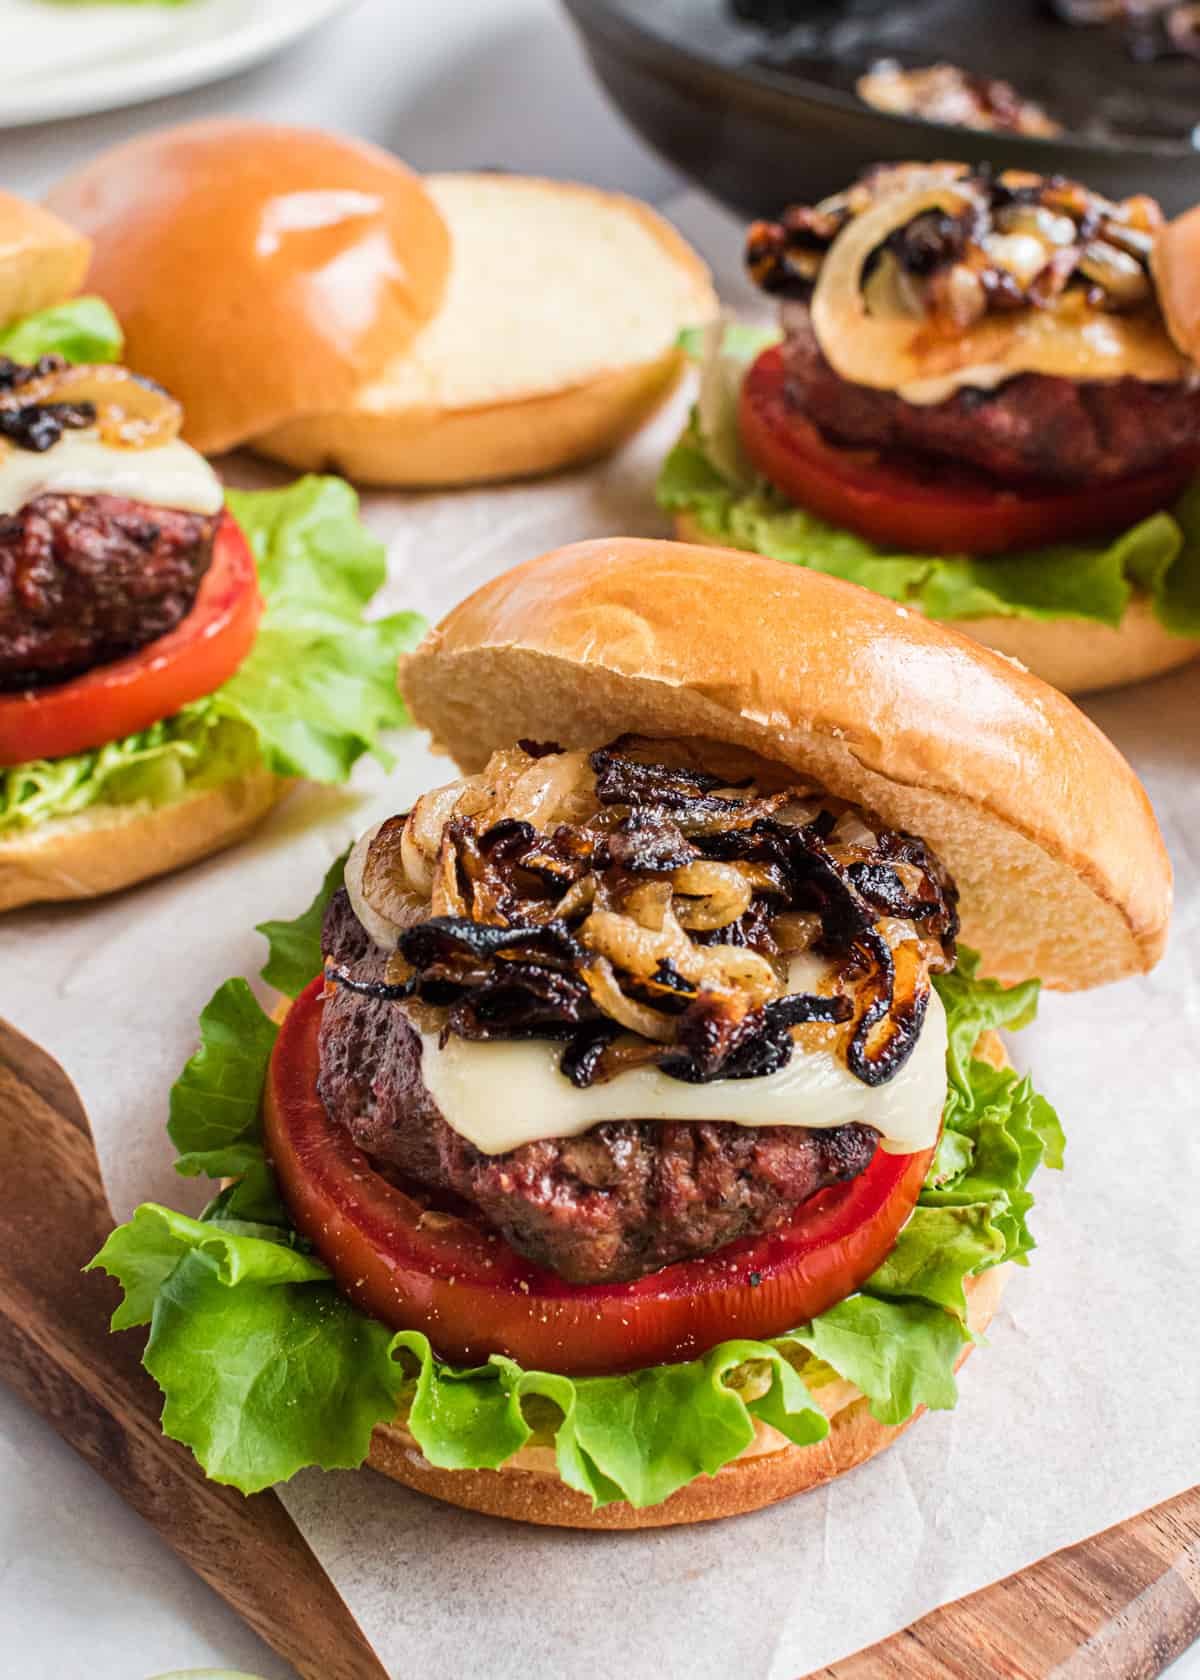 Italian burger with caramelized onions.